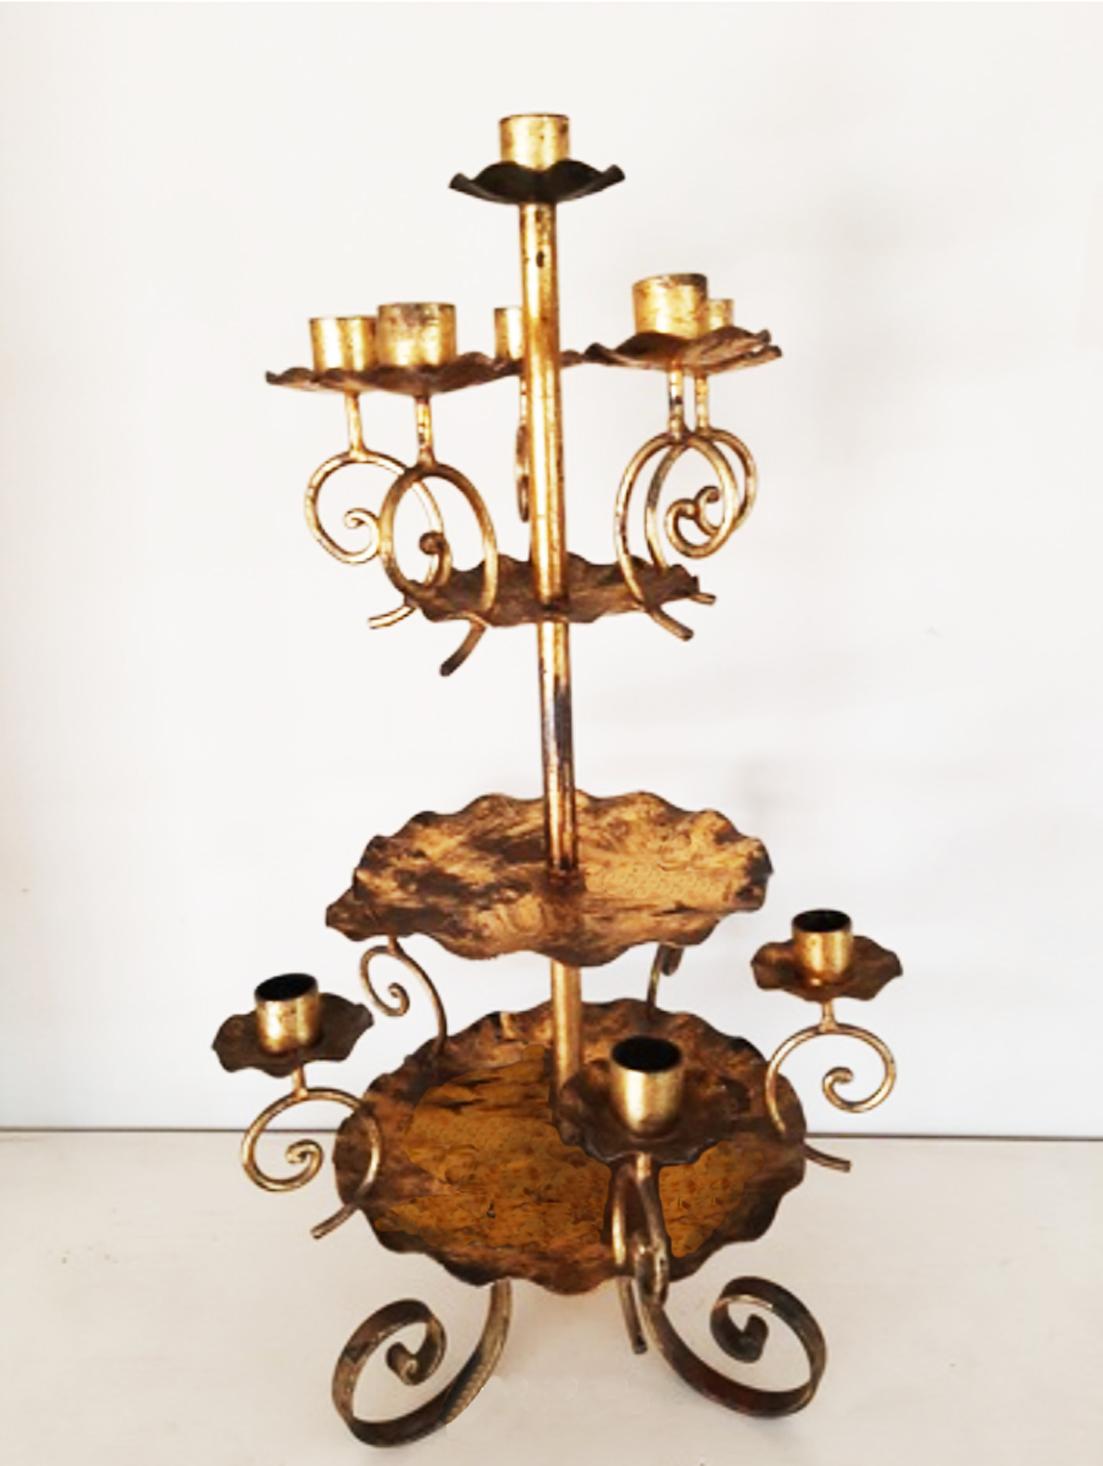 Very origina candlestick, for 10 candles, made in wrought iron 

It is an unusual piece. From the beginning of the 20th century or earlier
  It is very original and decorative

Golden candlestick candleholder or centerpiece to place on a table